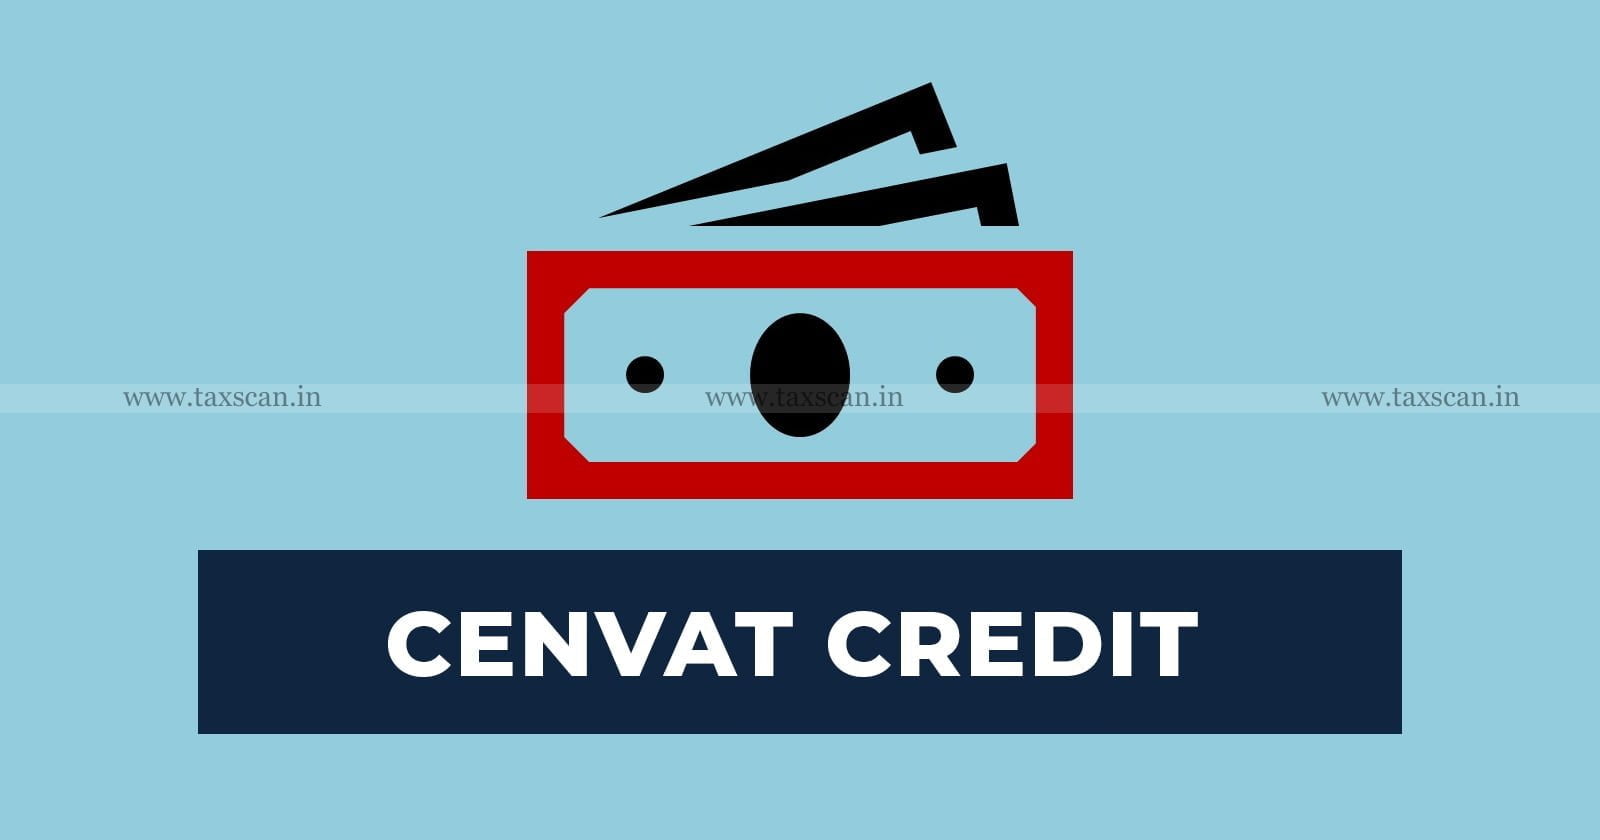 Input - and - Output - Services - CESTAT - Cenvat - Credit - Refund - Claim - on - Business - Services - and - Club - Membership - TAXSCAN